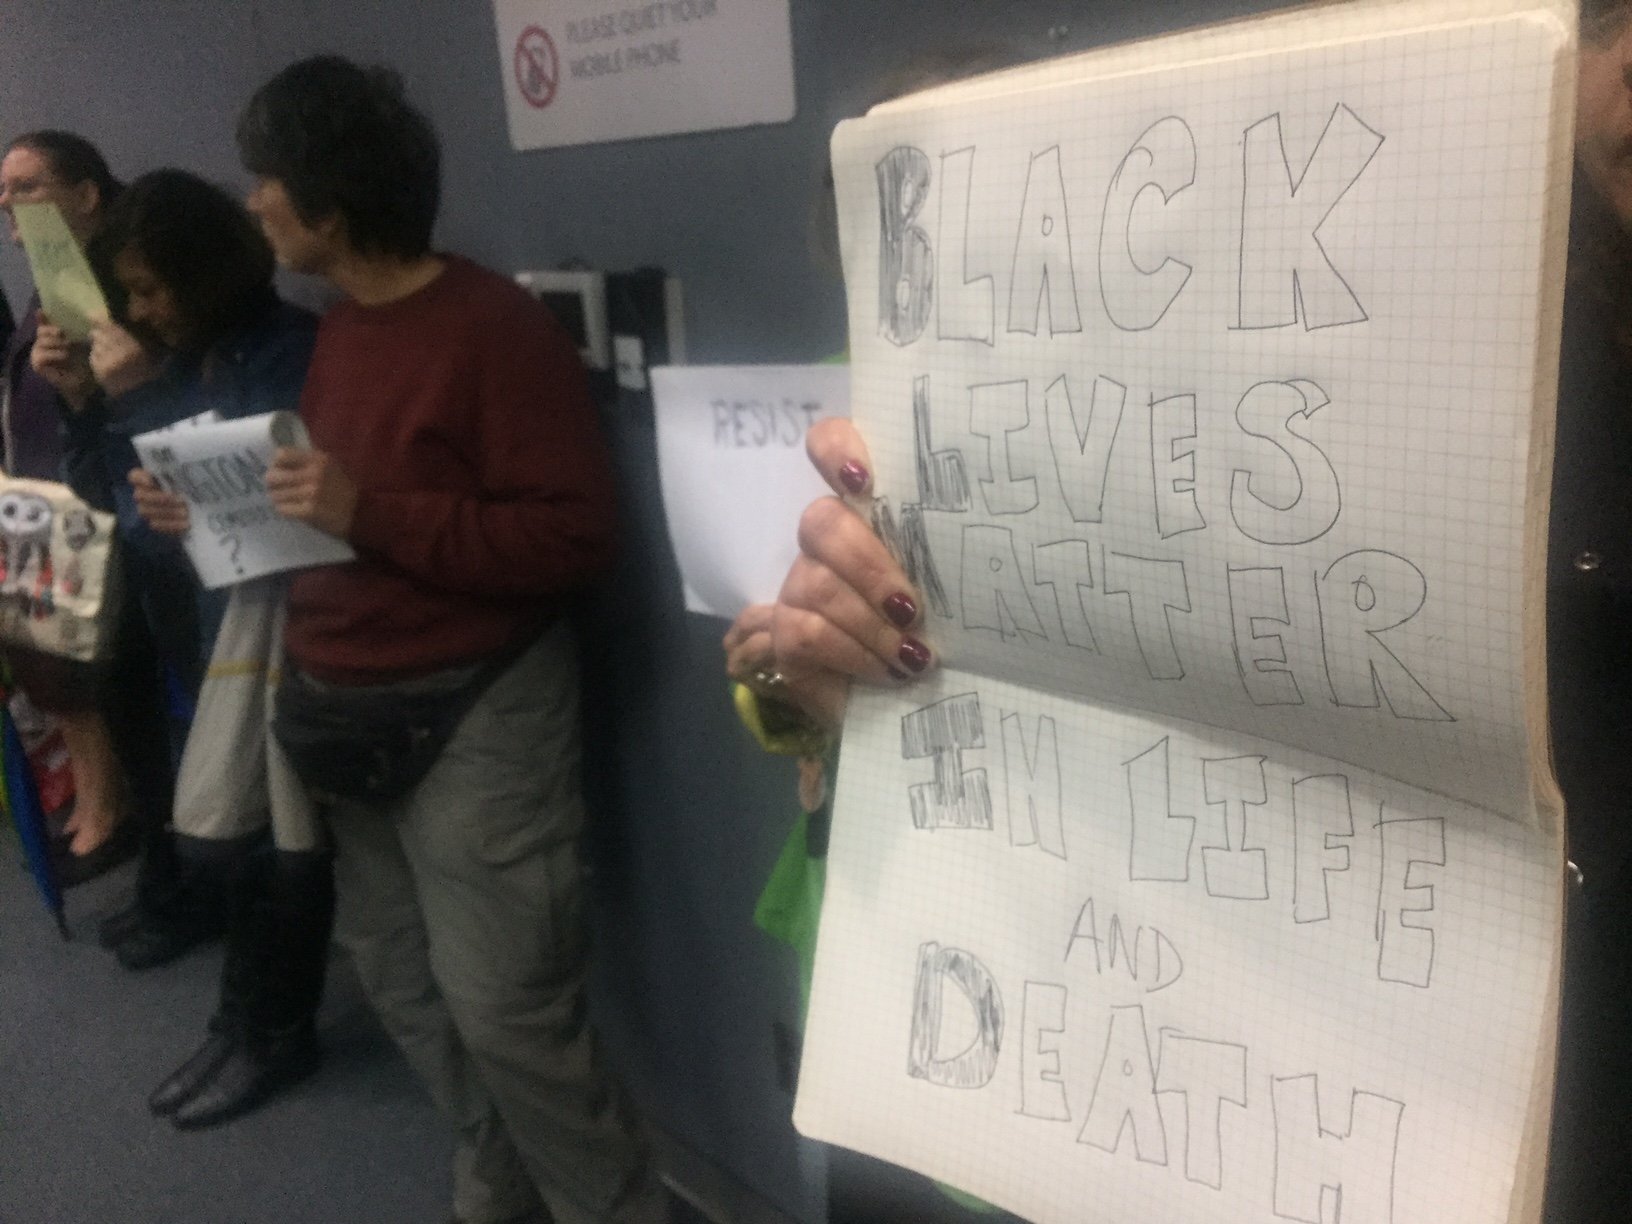 About 20 protesters stood in the back and held signs during the Montgomery County Planning Board’s meeting in Silver Spring. (WTOP/John Aaron)